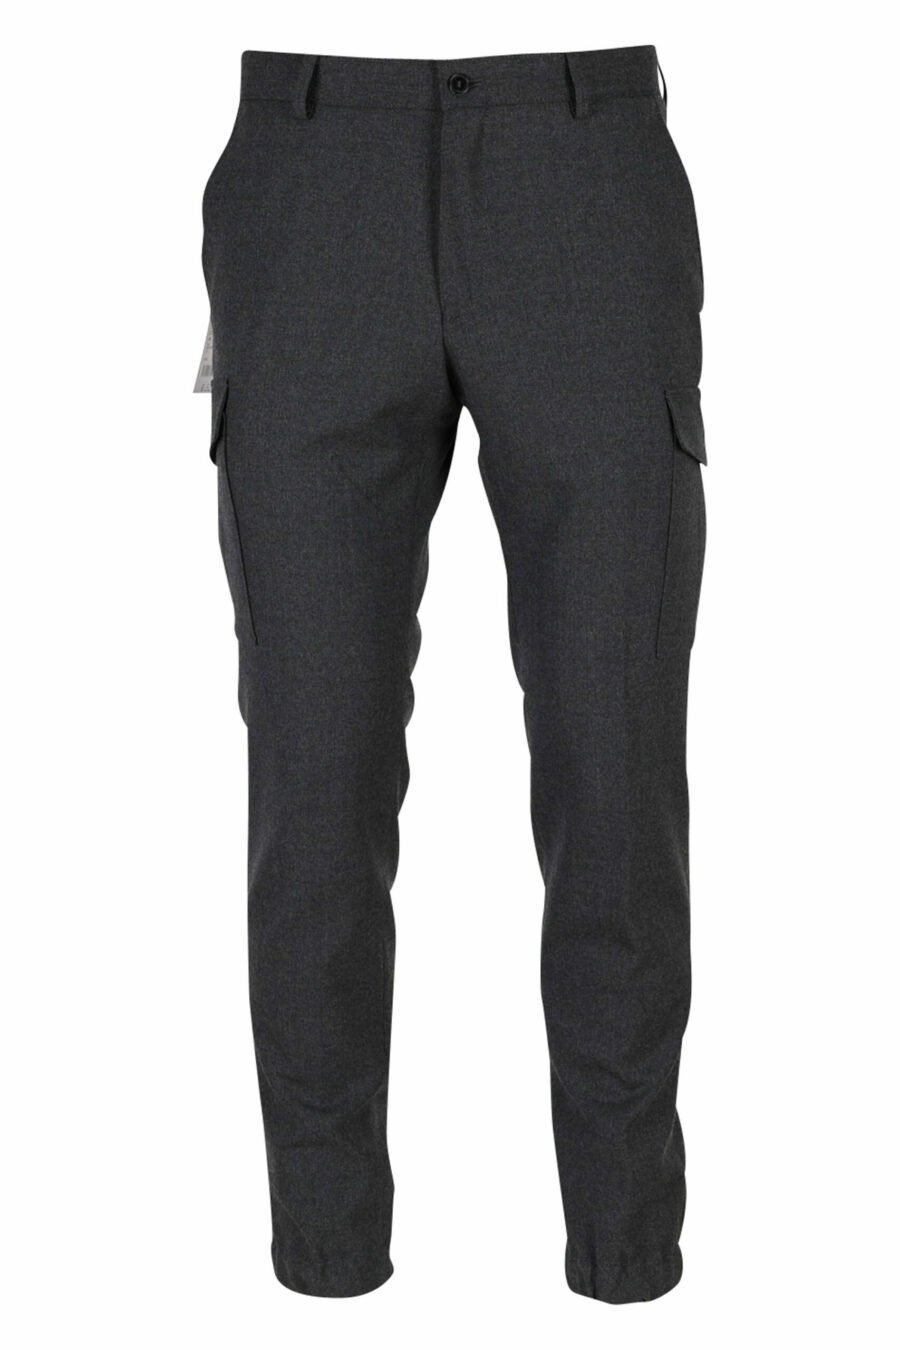 Grey suit trousers - 4062226397018 12 scaled